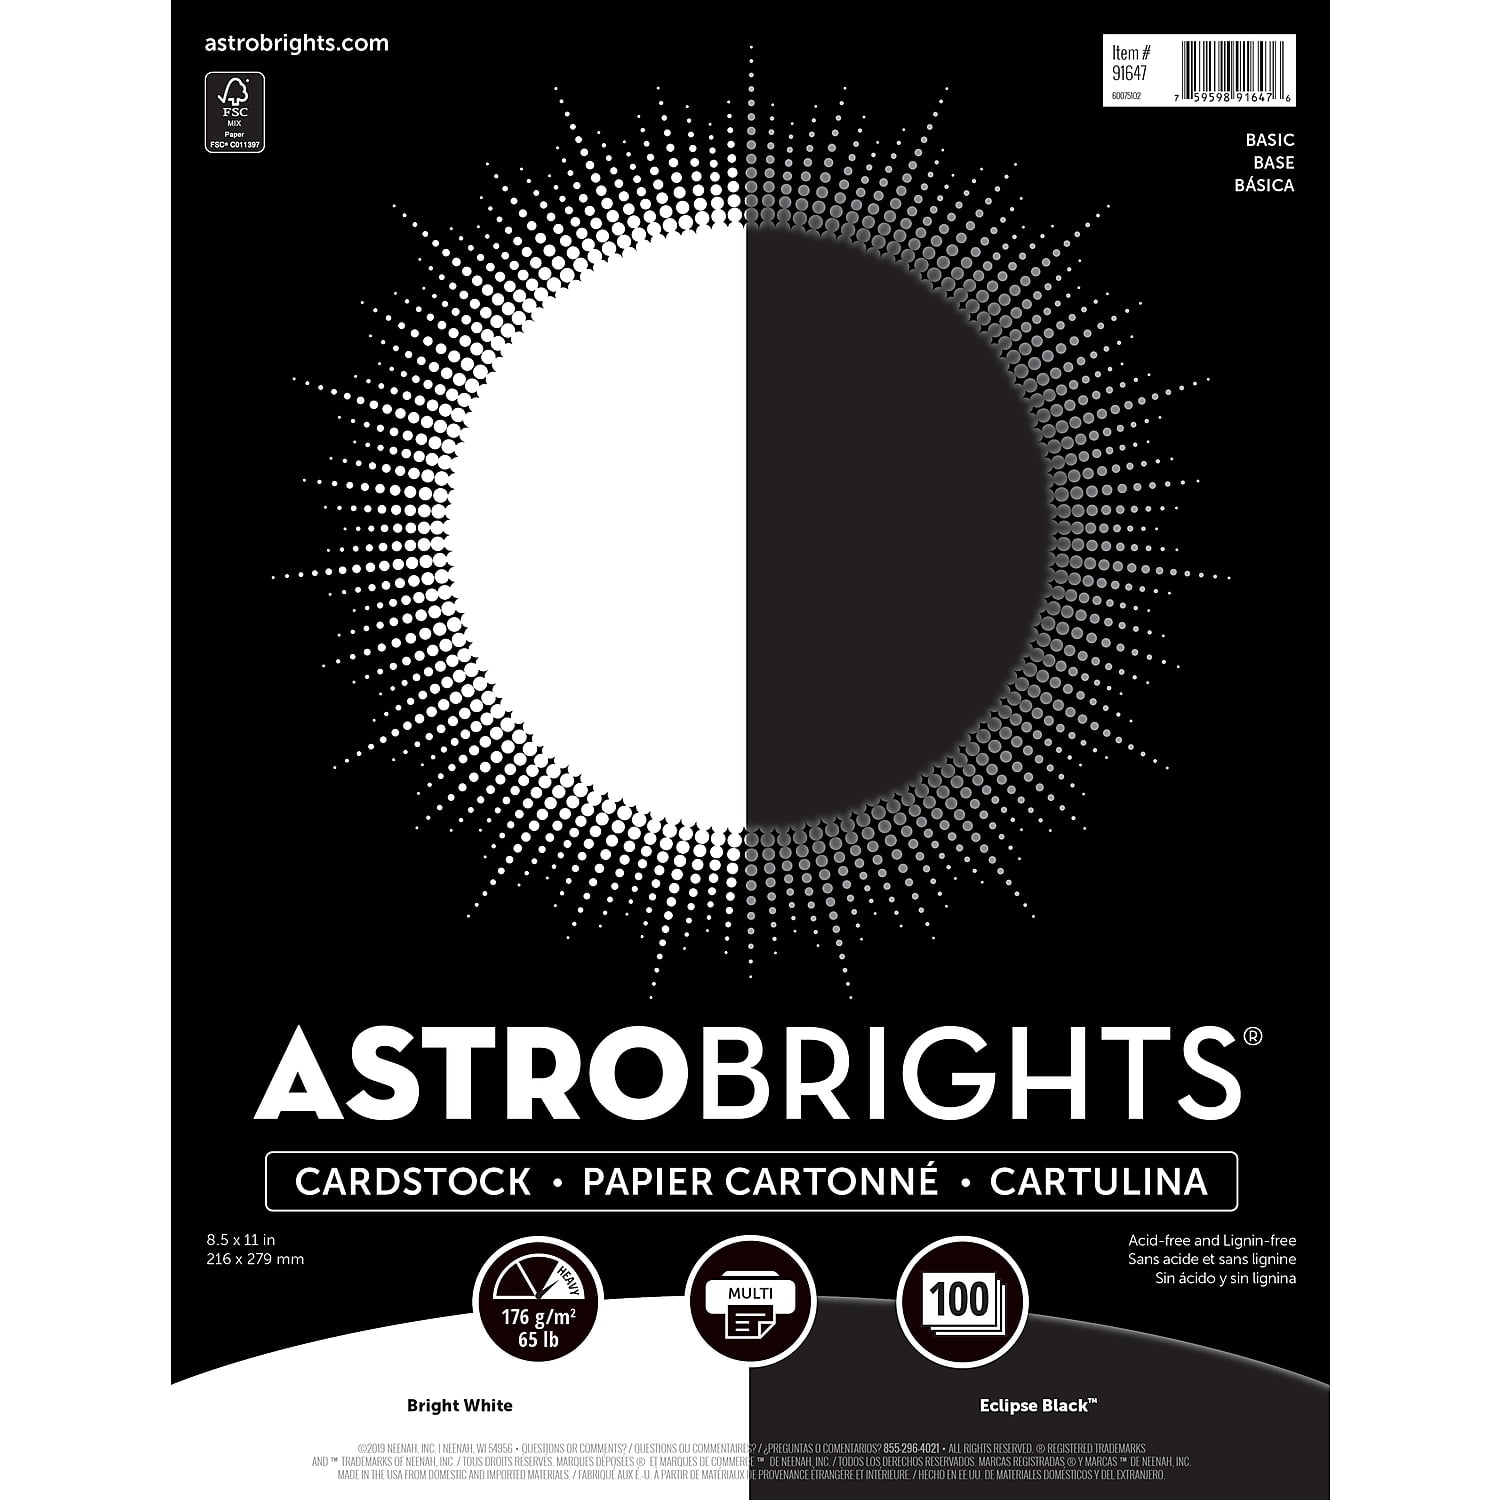 Specialty Business Card - Astrobright 65 lb. - Front & Back